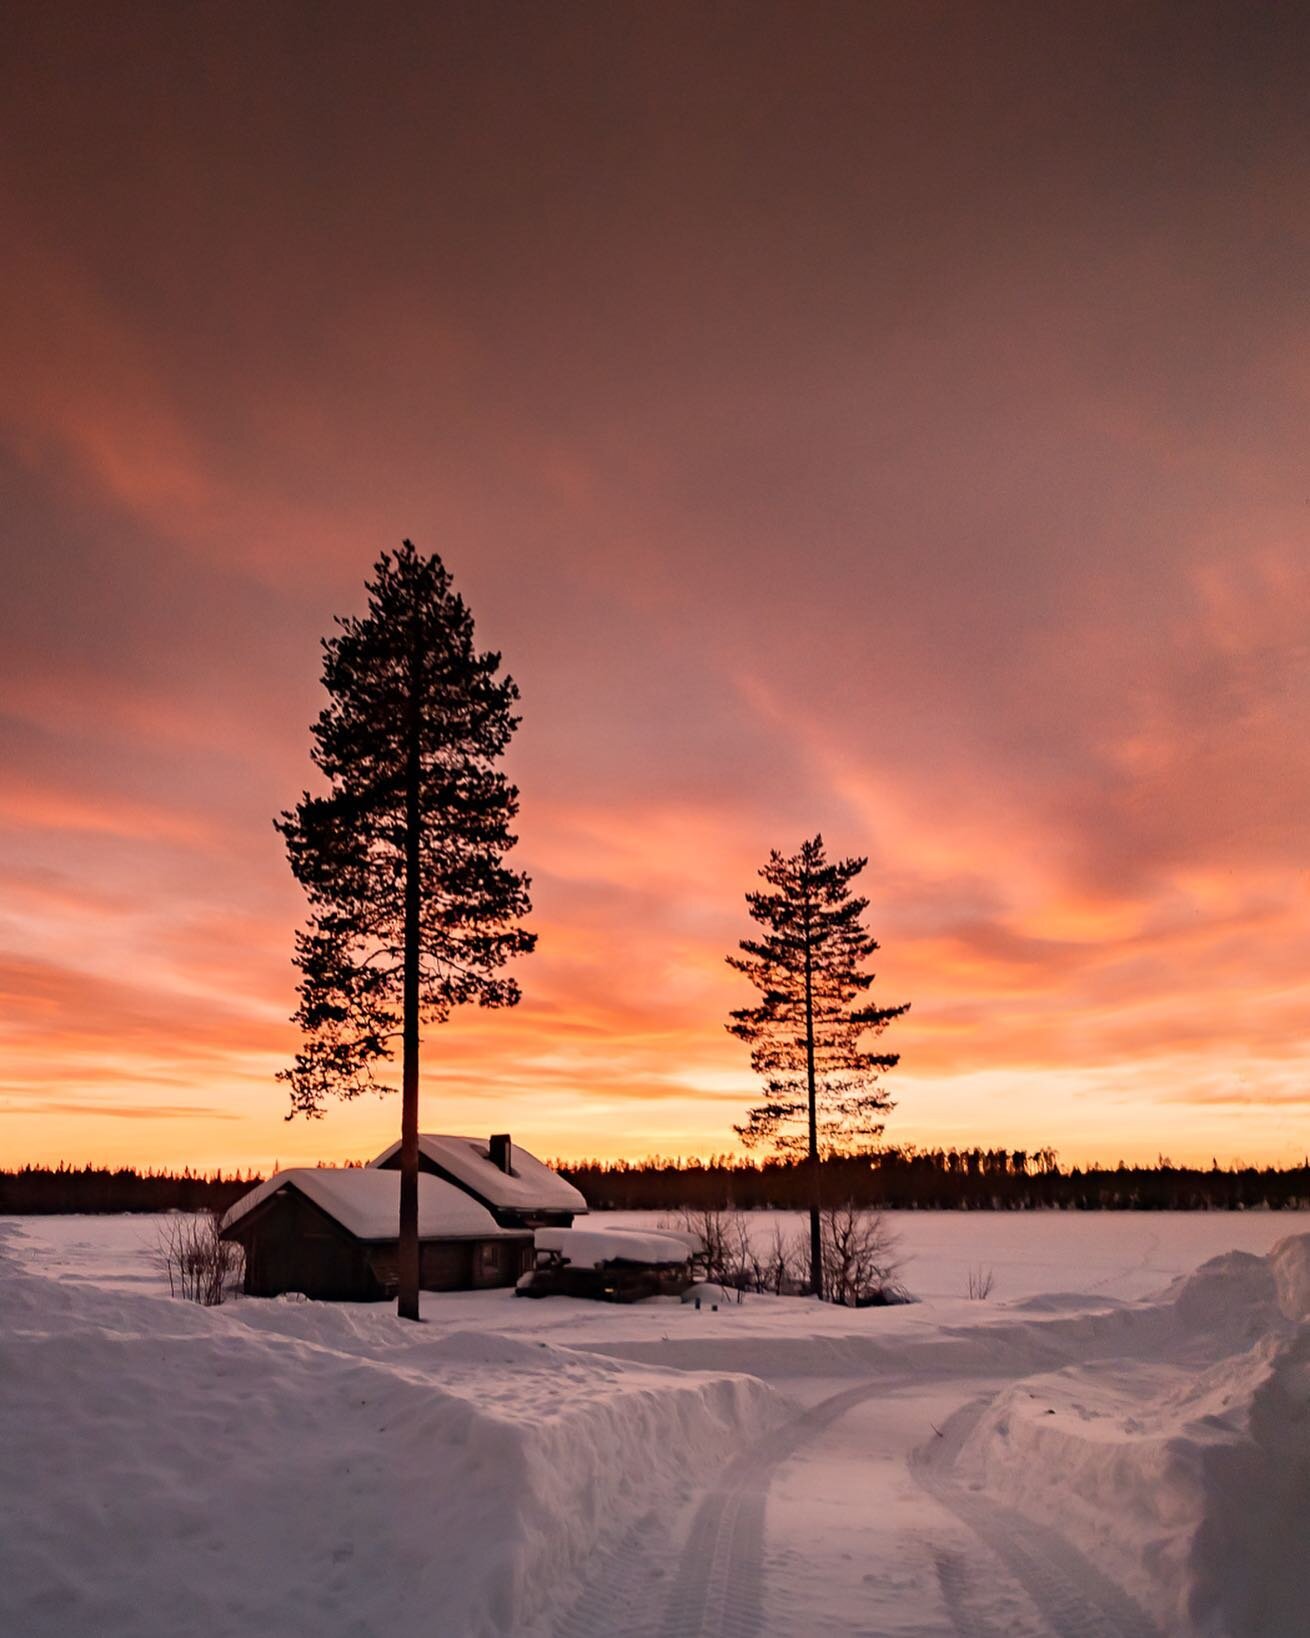 The sunsets in Lapland are so fascinating!  The colors in the sky intensified with every passing minute. As I was I prepared to leave and warm up @Huuvahidaway, I witnessing this spectacular light that left me mesmerised. 💛✨ 

#heartoflapland #swedi